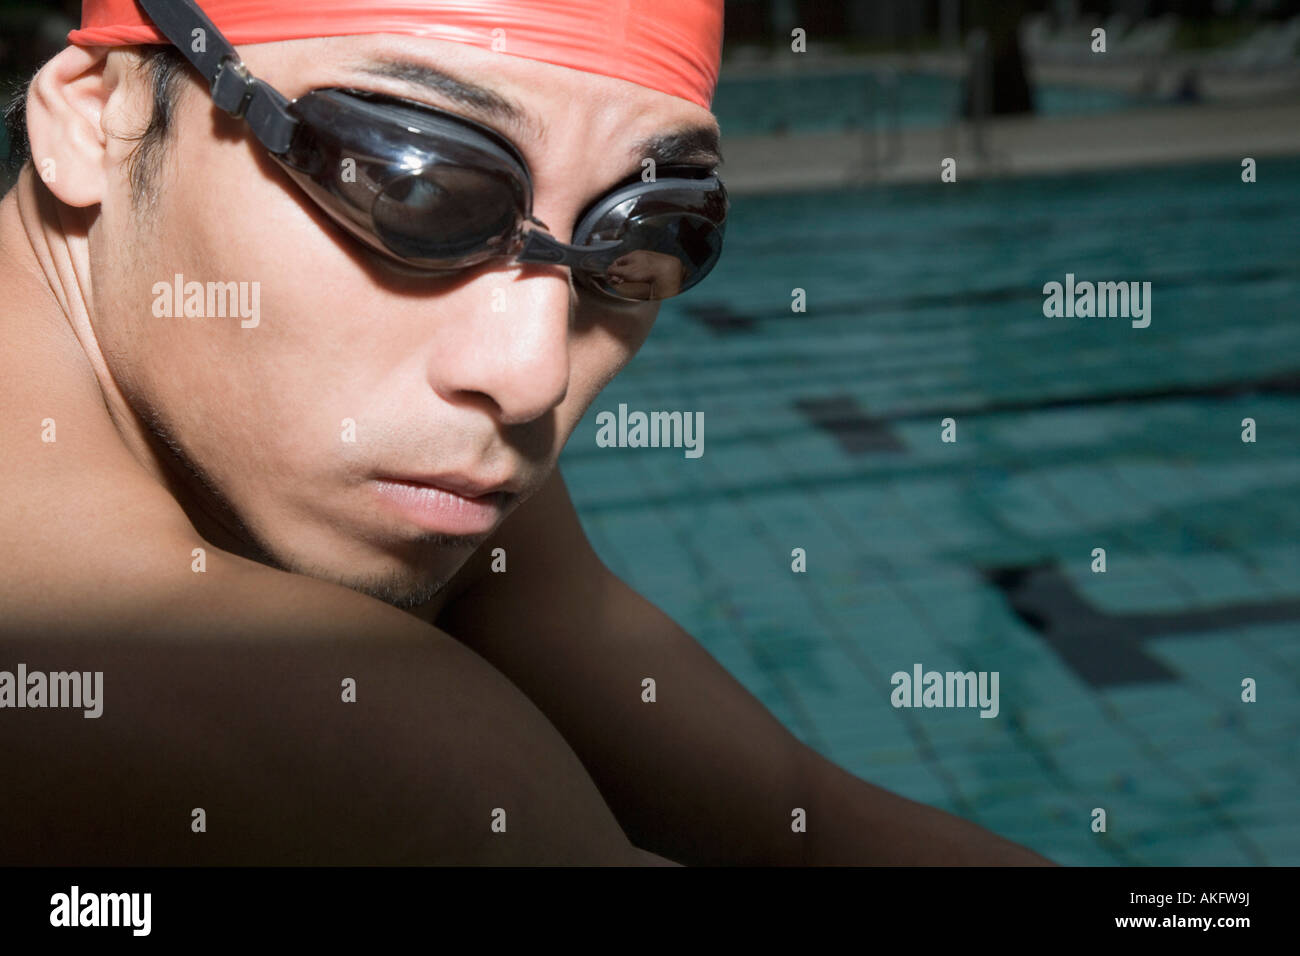 Portrait of a young man wearing swimming goggles Stock Photo